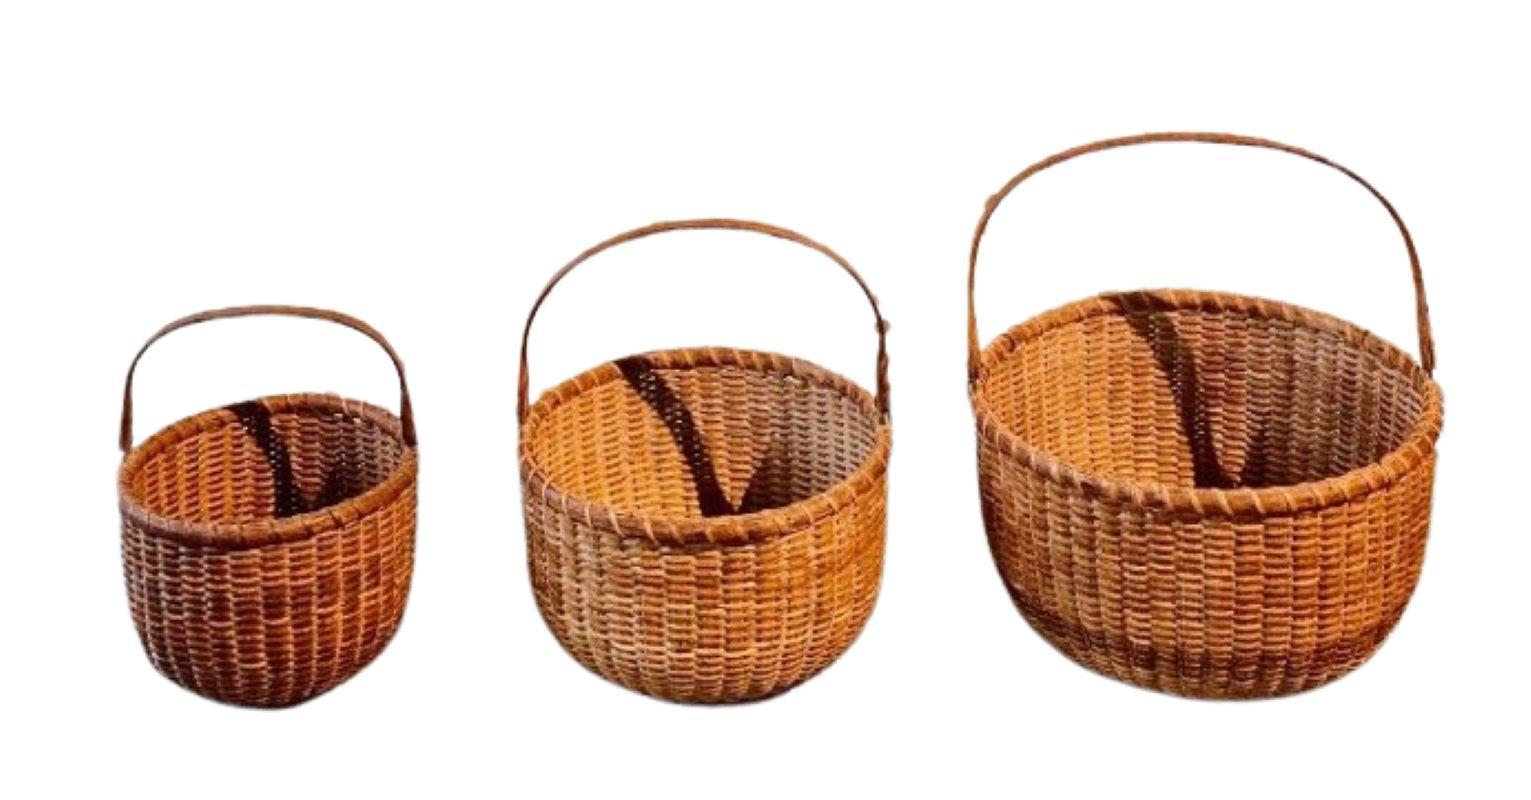 19th Century Nest of Three Nantucket Lightship Baskets, circa 1880, a graduated set of three round, open baskets having cane weave on rattan staves, a carved swing handle with an elongated ovoid lozenge end connected to tin ears that extend down